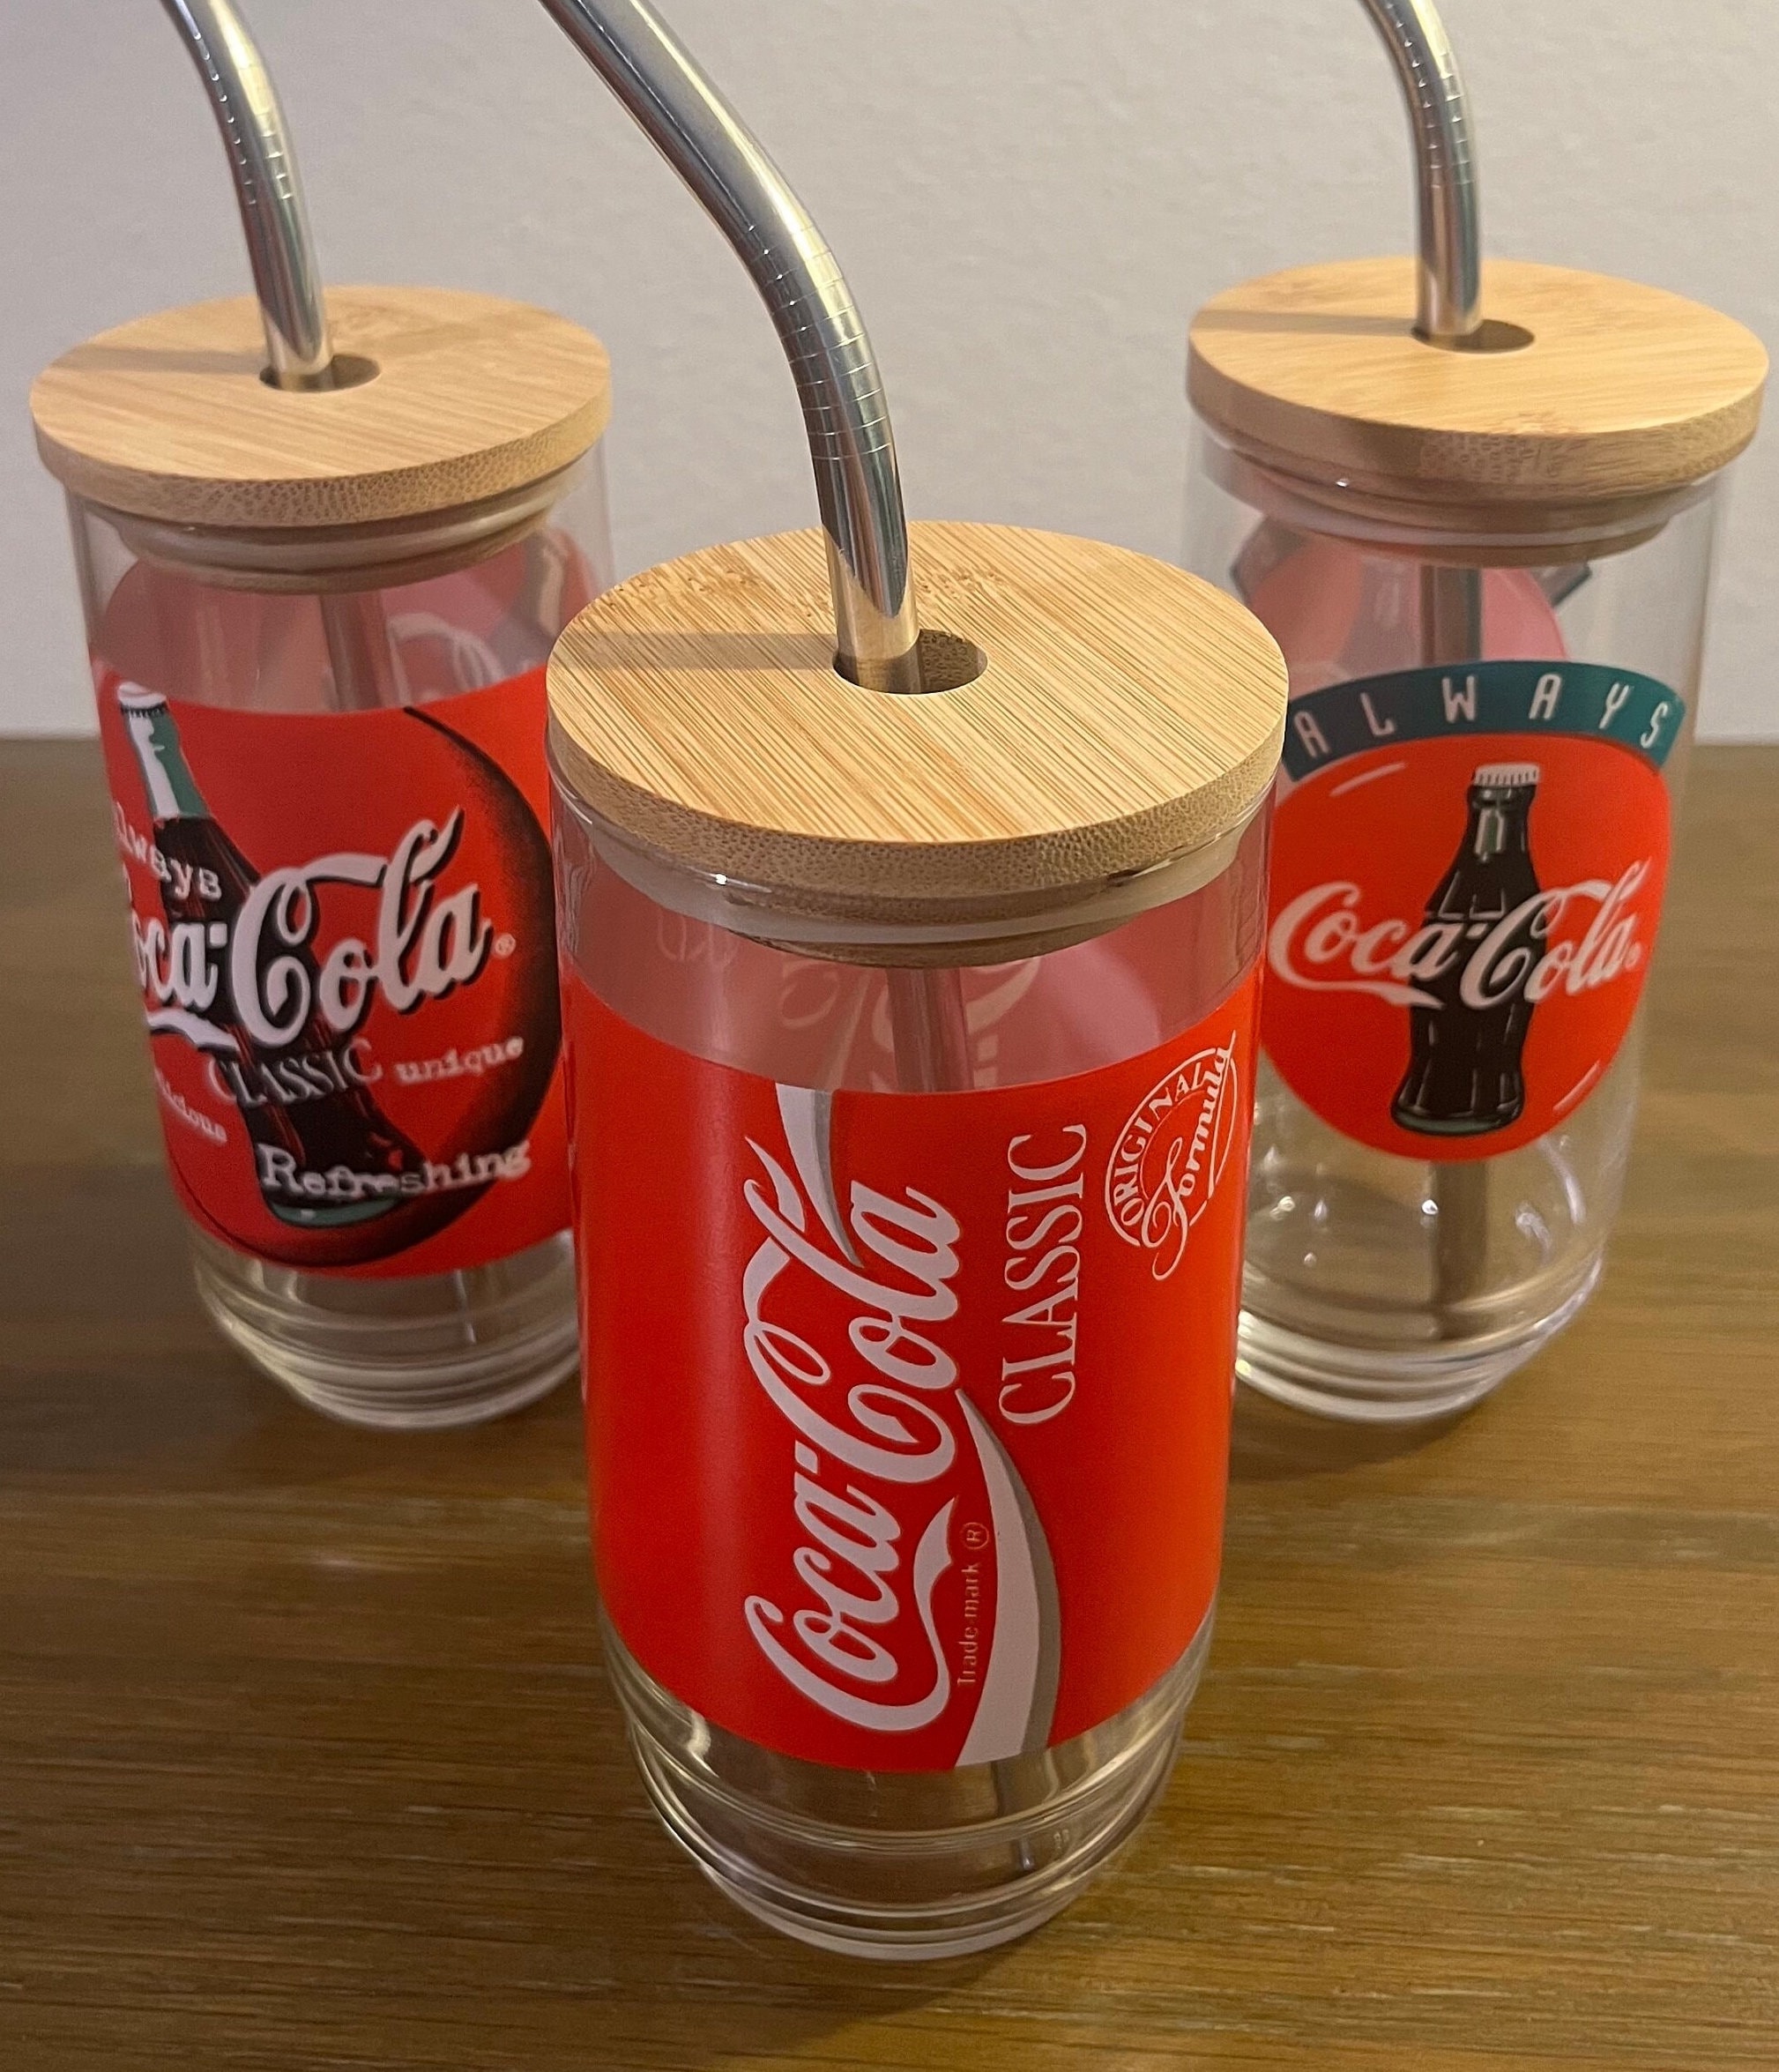 1/2/4PC Reusable Straw Cup with Wooden Lid and Glass Straws Drinking Coke  Cup for Milk Coffee Juice Beer Cola Glasses Straws Cup